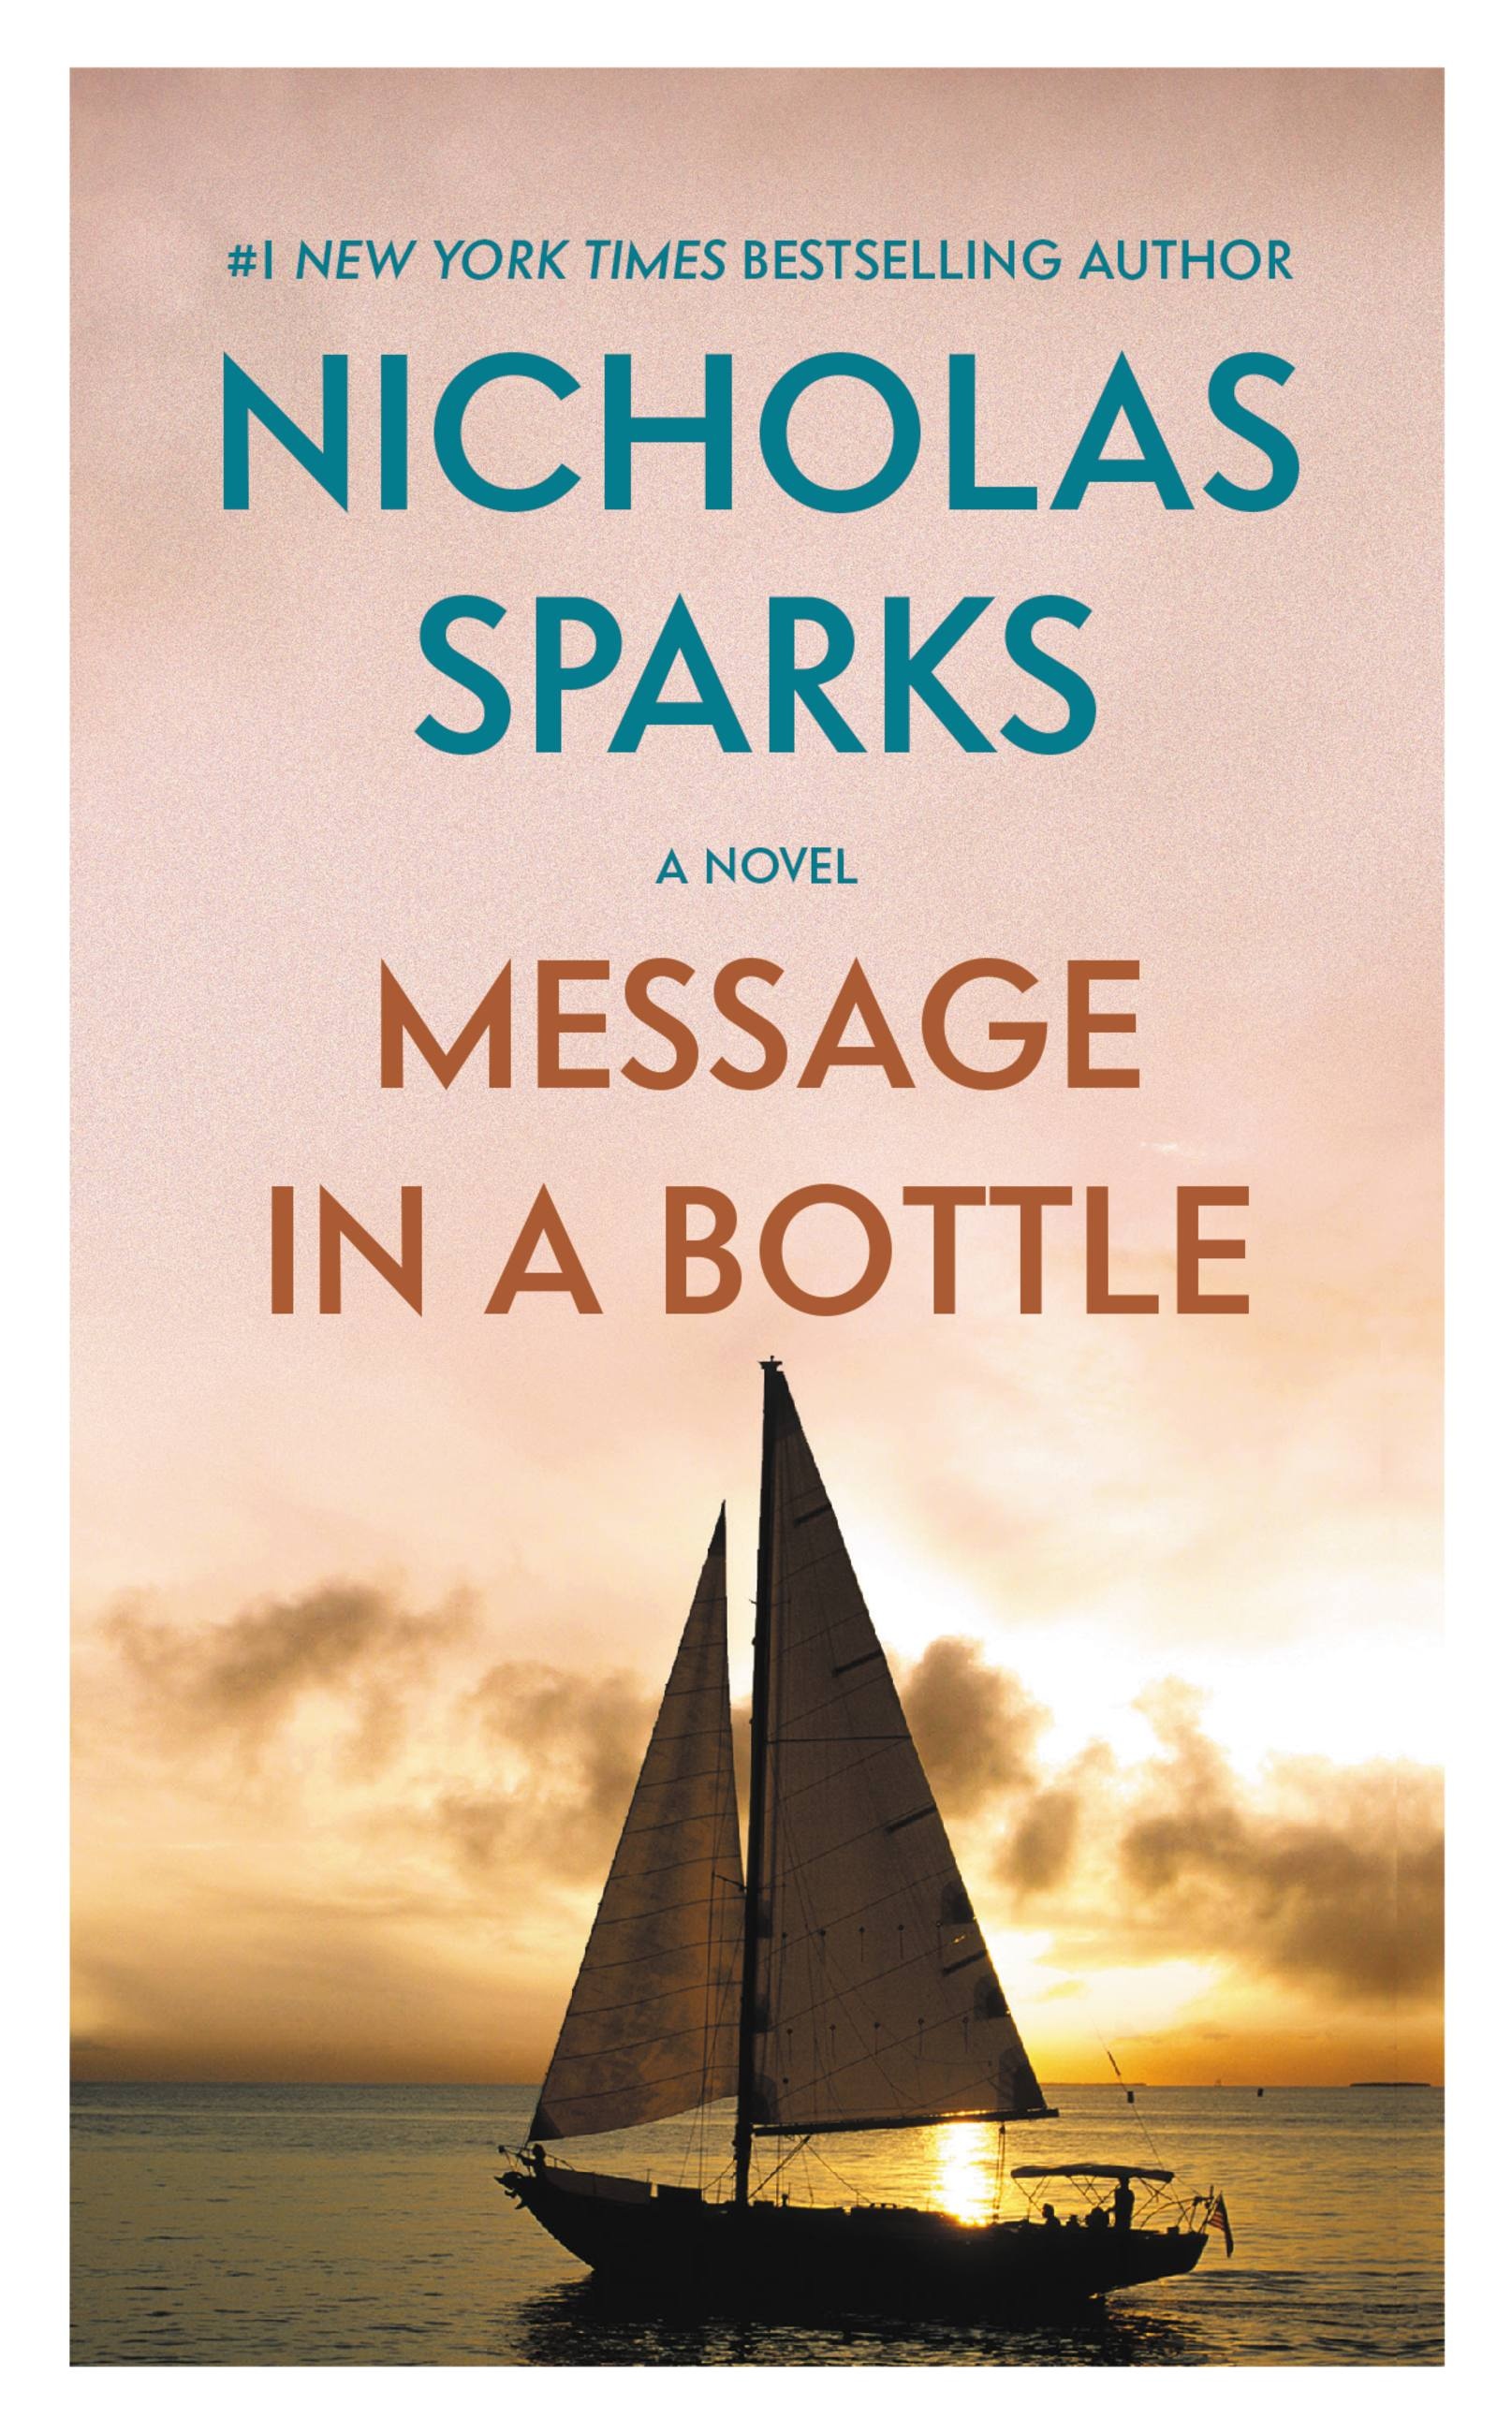 Message　Hachette　Bottle　Sparks　in　a　Book　by　Nicholas　Group